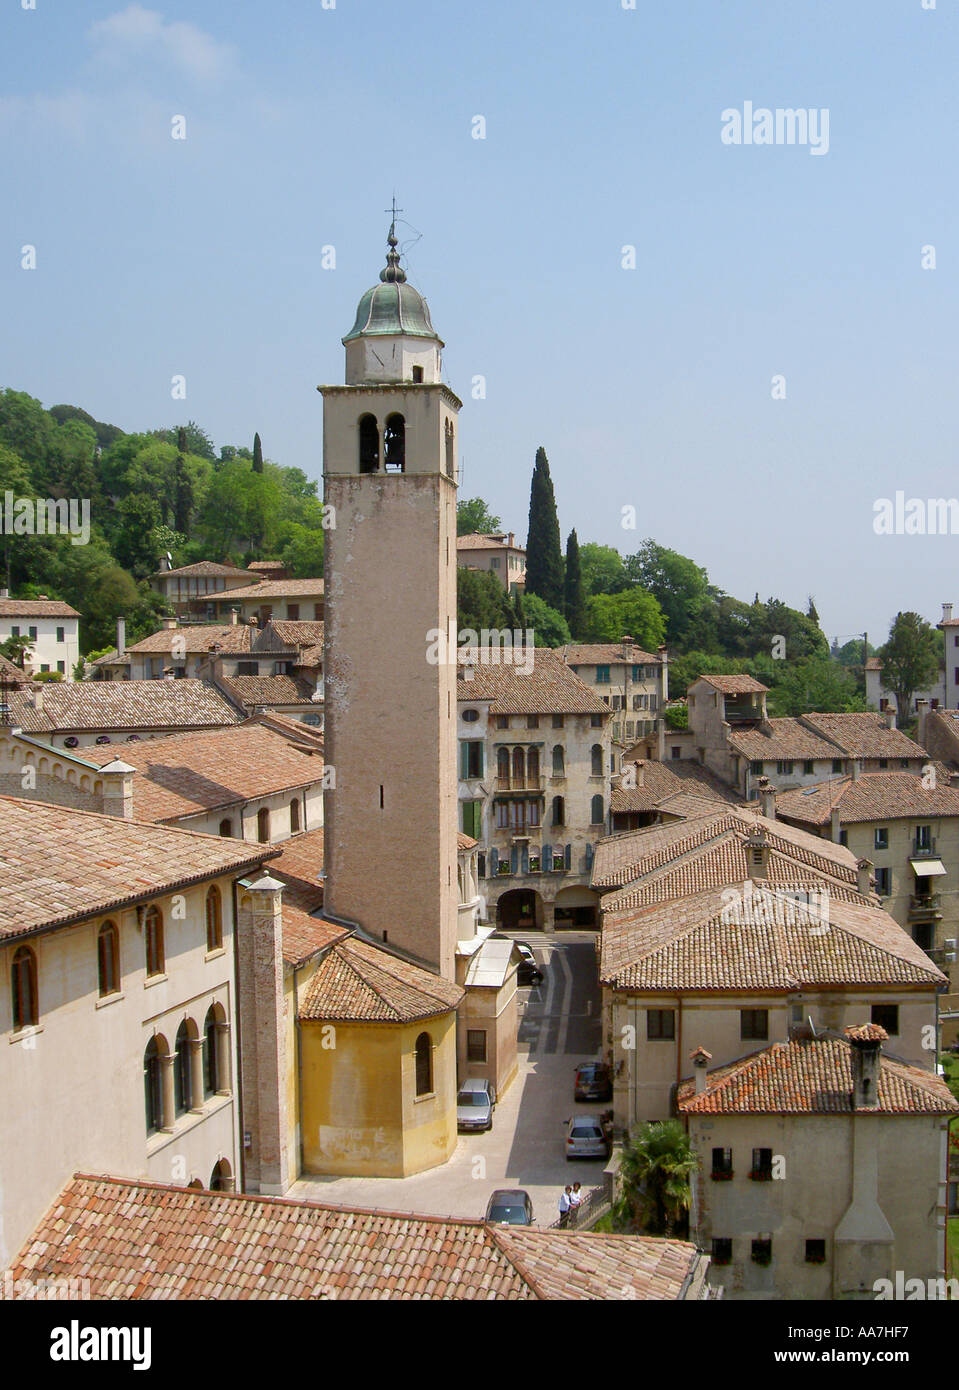 The cathedral campanile rises above the roof tiles in the centre of the ancient town of Asolo, Treviso, Italy Stock Photo